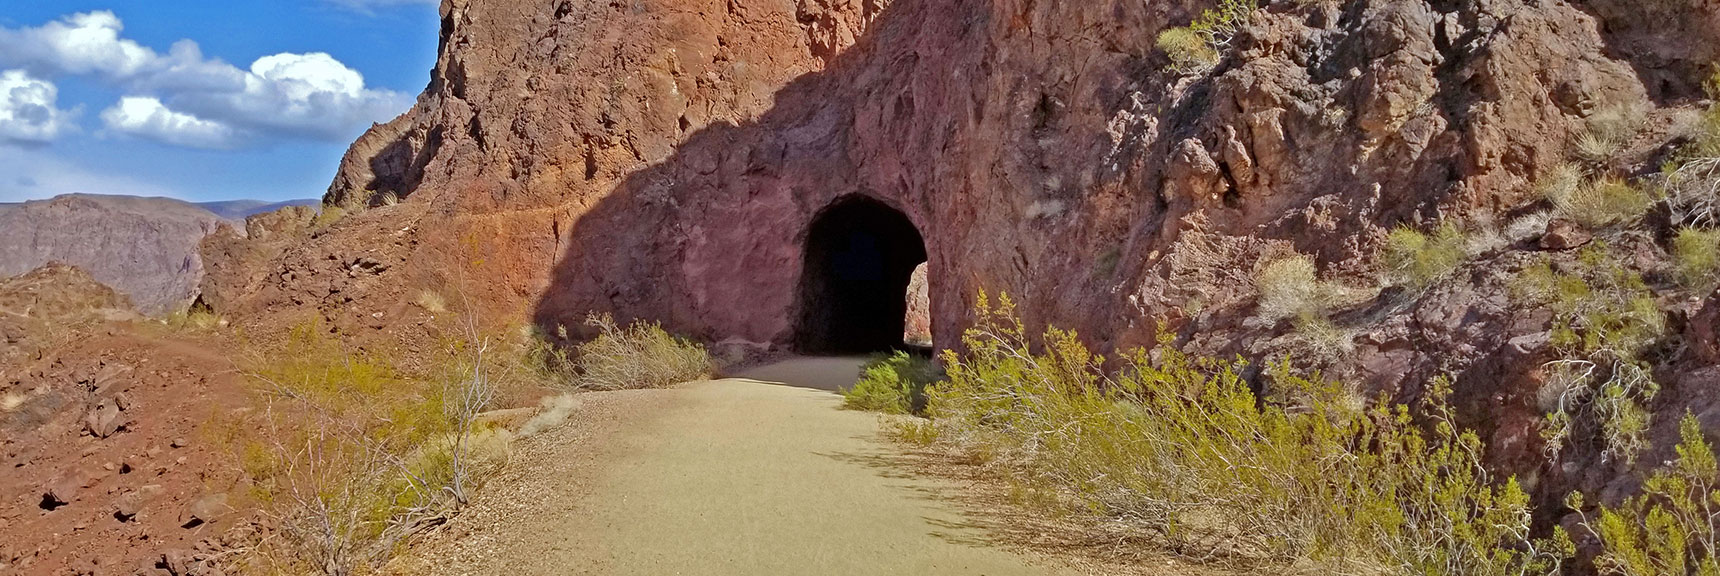 Approaching Tunnel #4, Rounding a Curve Along the Lake | Historic Railroad Trail | Lake Mead National Recreation Area, Nevada